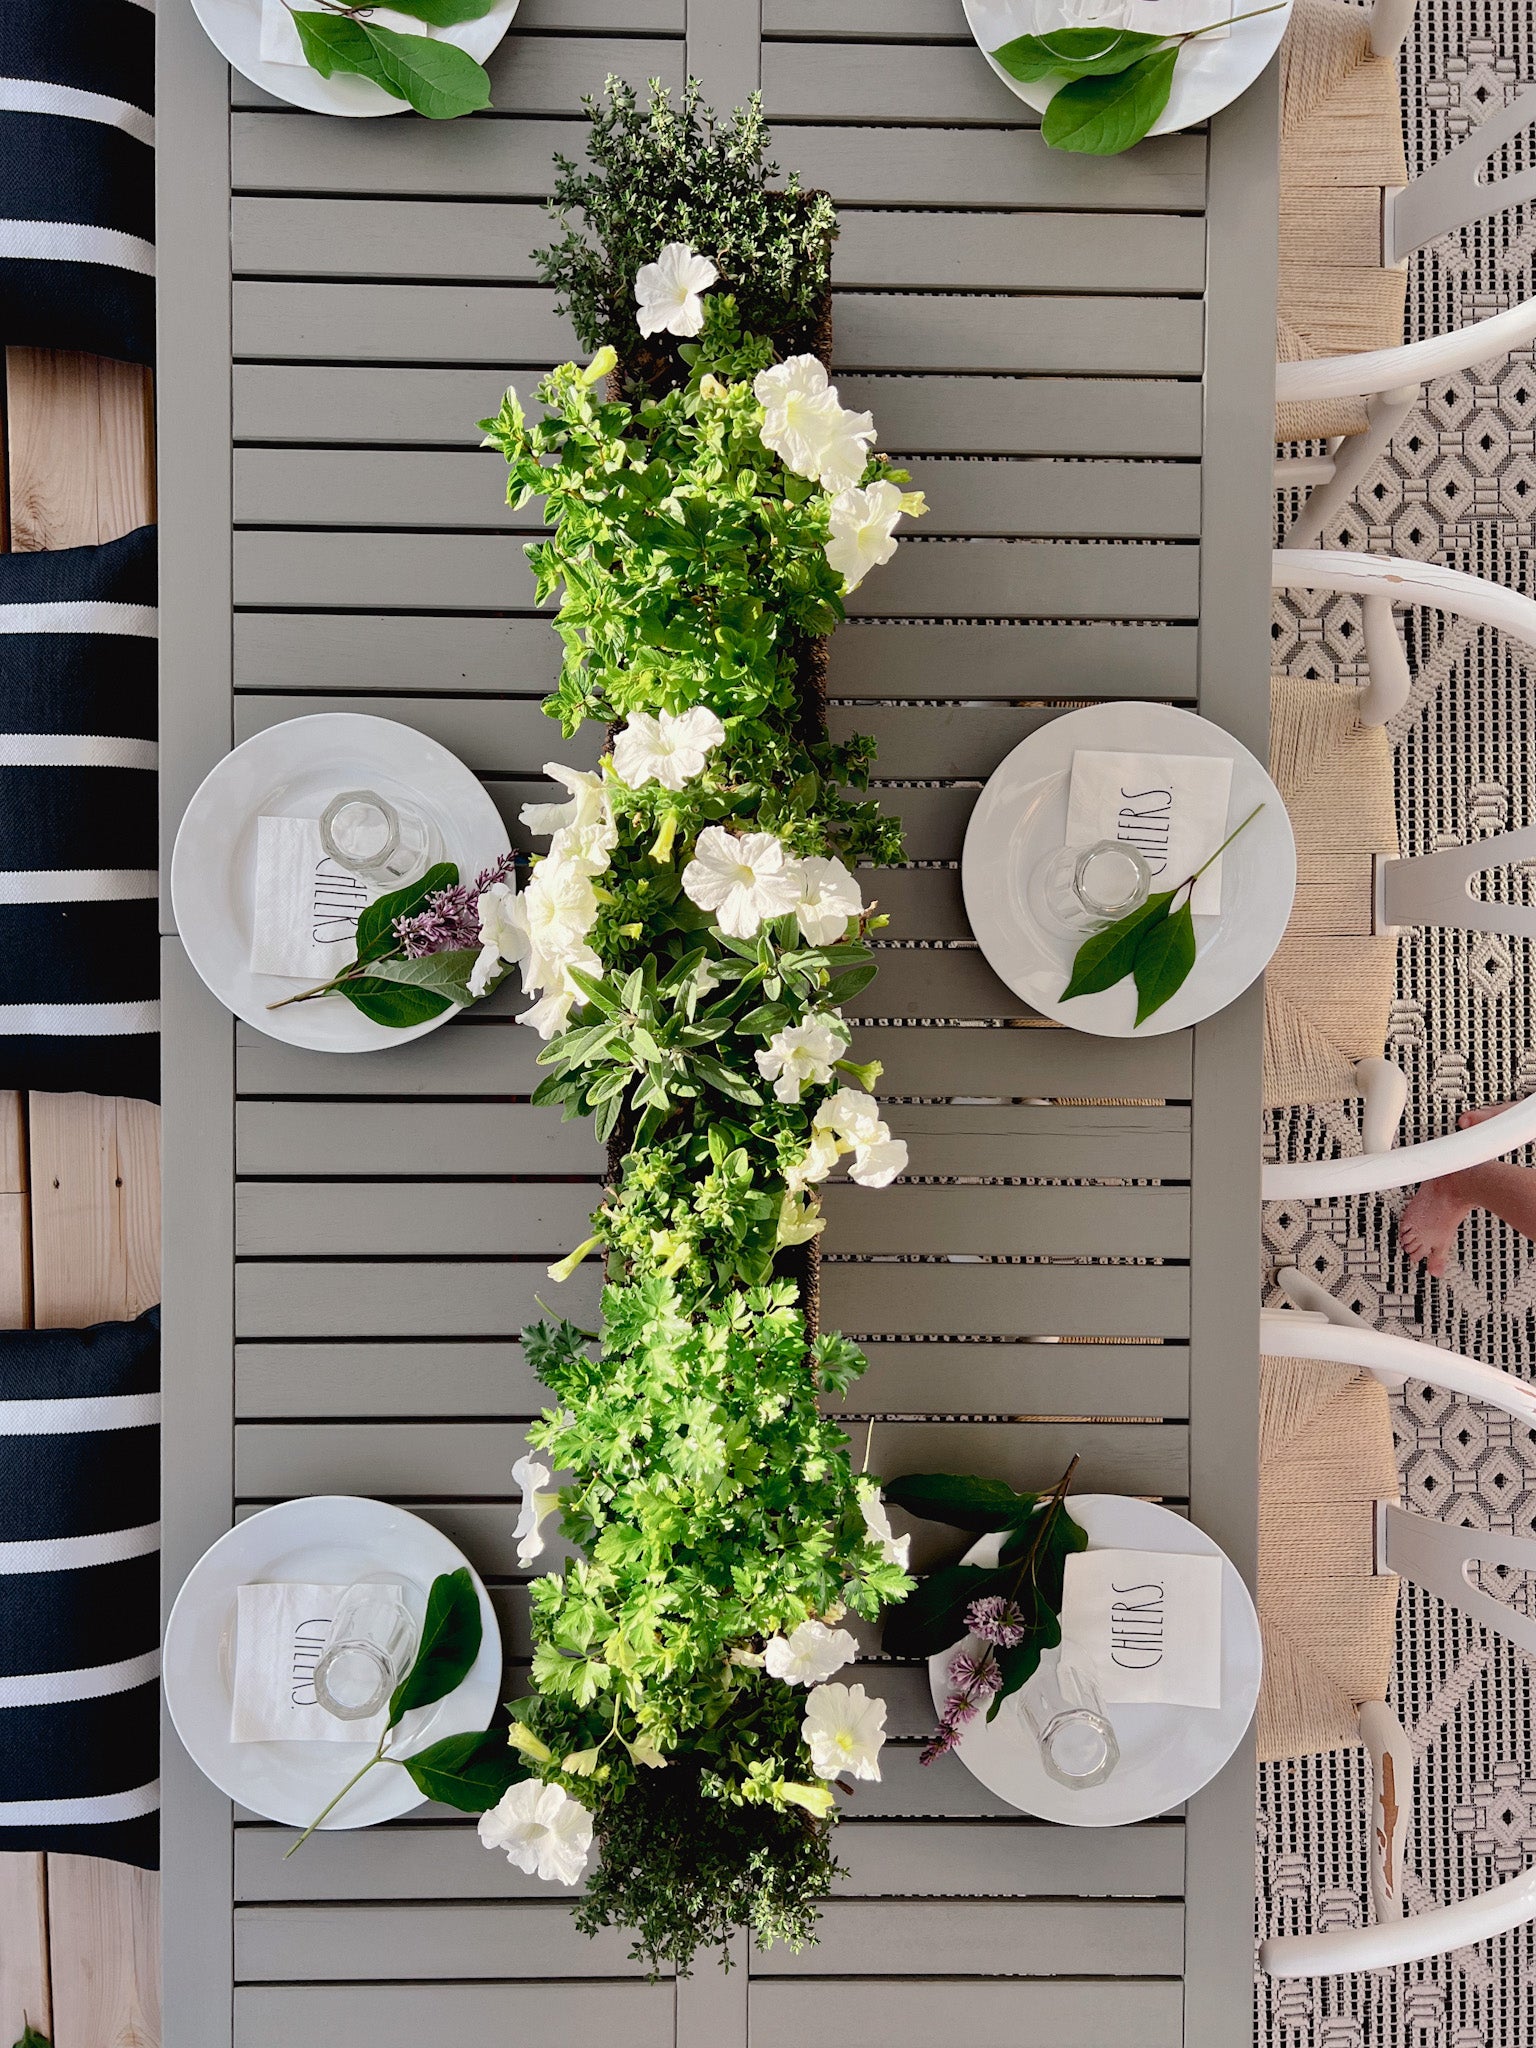 Ikea Bondholmen Dining Table with white wishbone chairs set for an outdoor dinner party with white dishes. Petunia and herb planter decorates the outdoor dining table